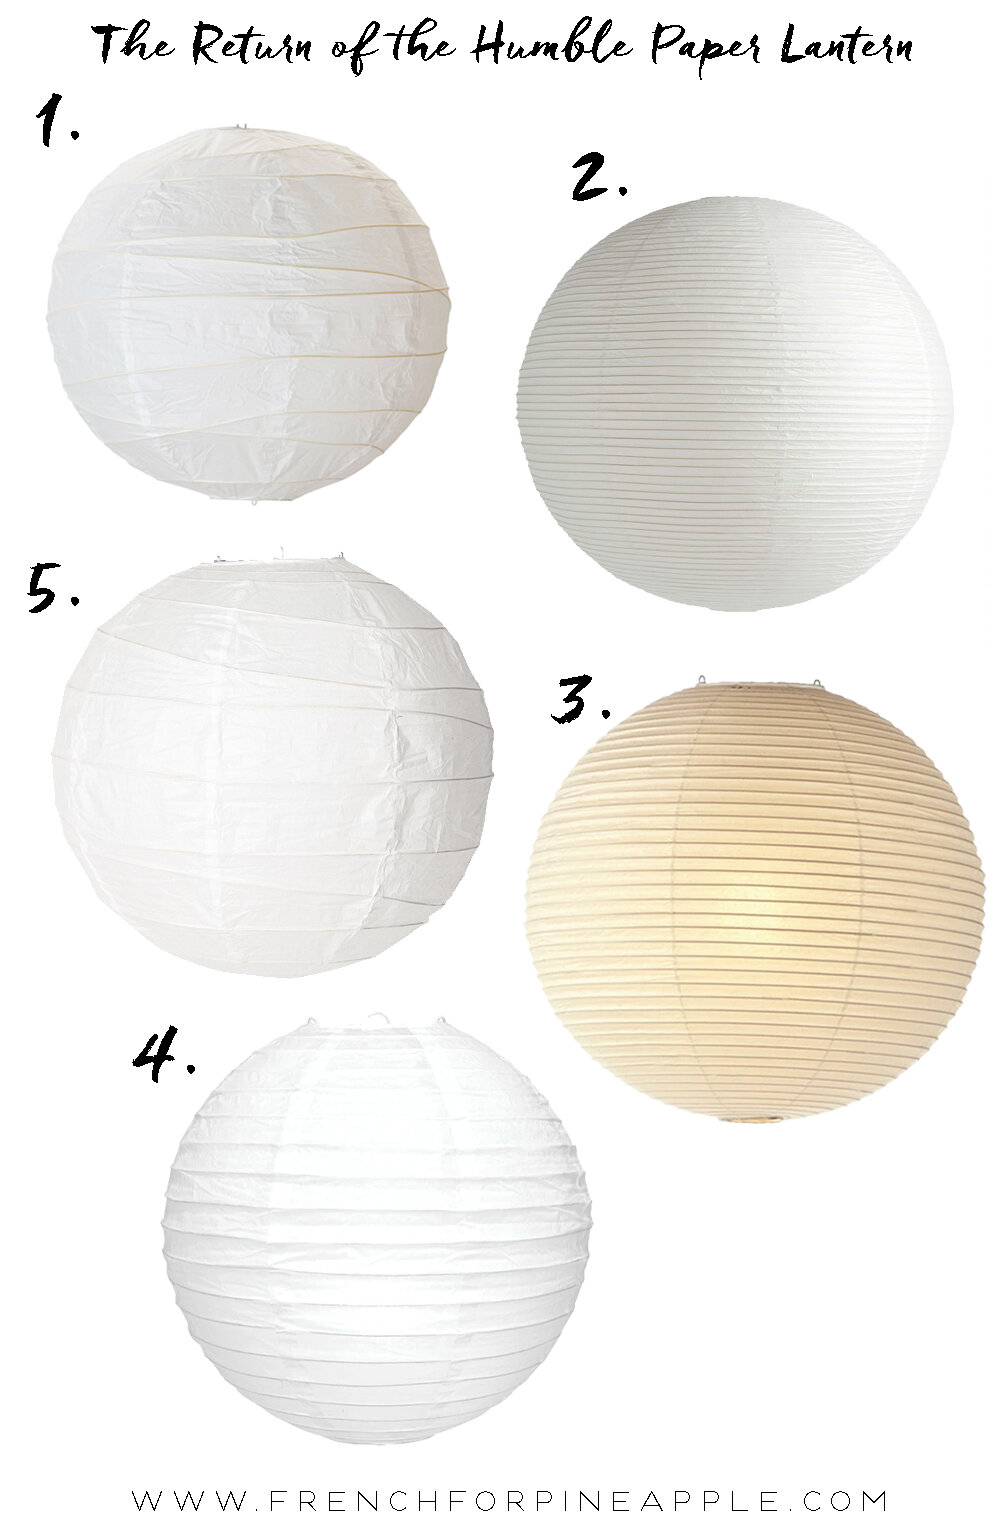 The Return Of Humble Paper Lantern, Rice Paper For Lampshades